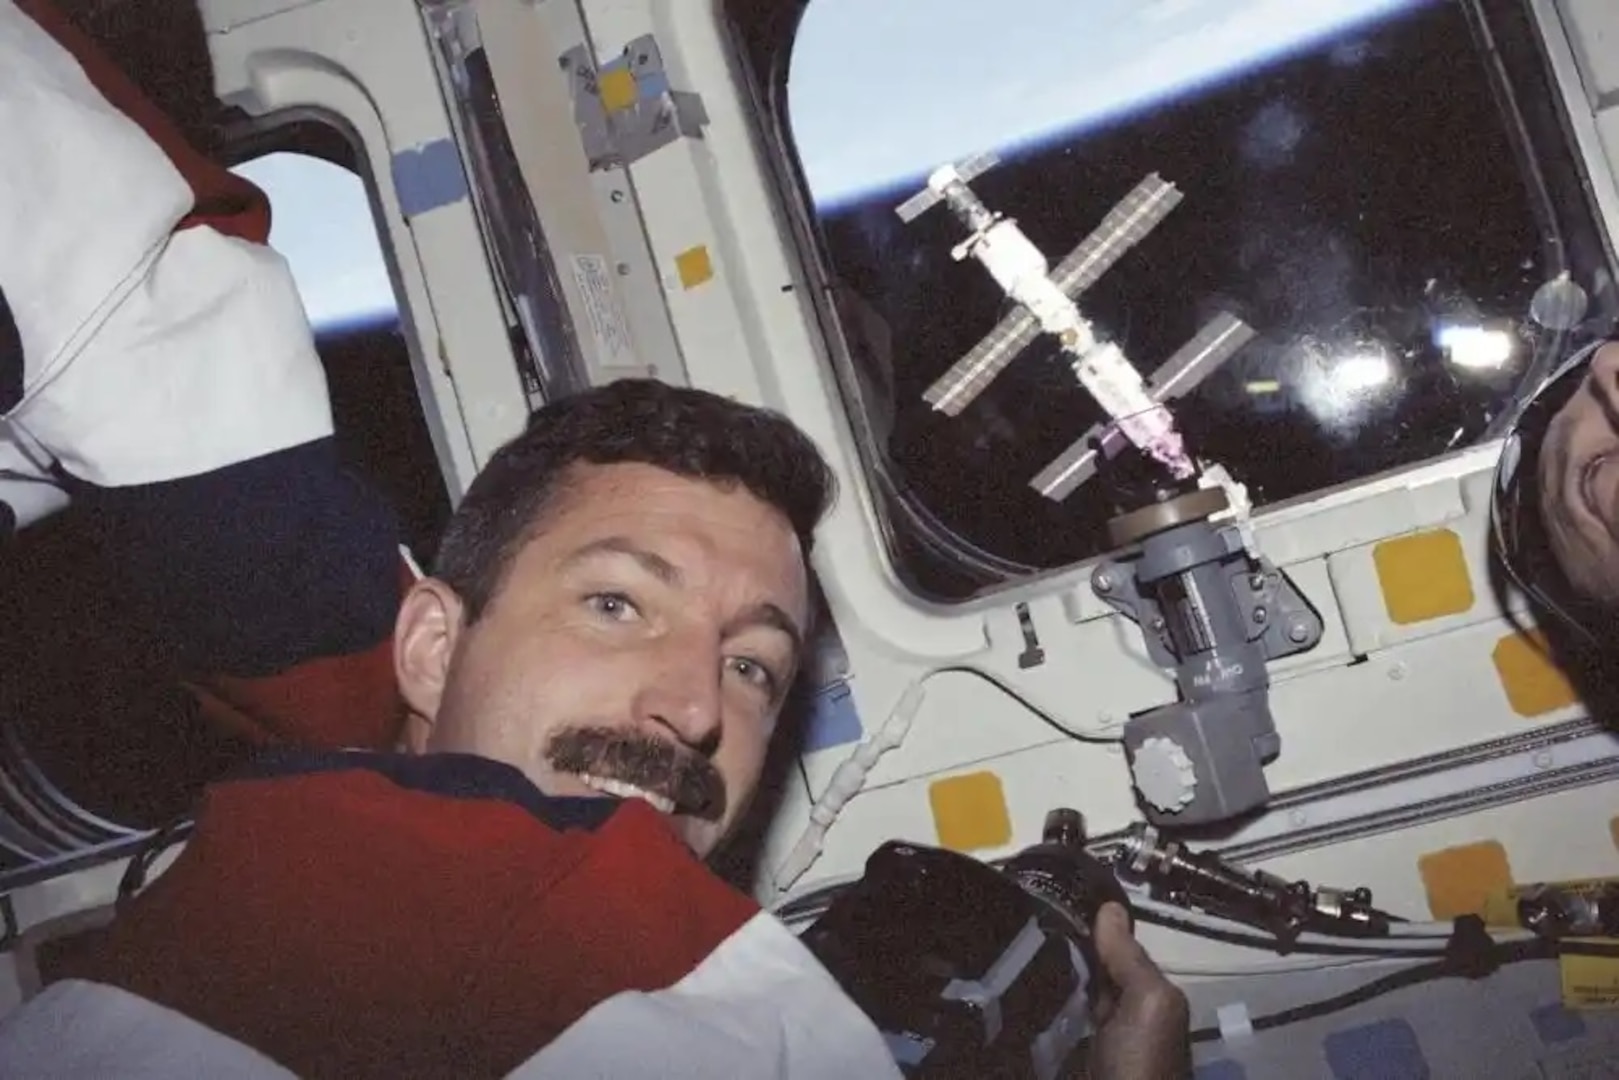 Astronaut Daniel C. Burbank, mission specialist, prepares to photograph the International Space Station through the overhead windows on the aft flight deck of the Space Shuttle Atlantis. Burbank is returning to the U.S. Coast Guard Academy to serve as a Professor of Practice in the Mechanical Engineering program.